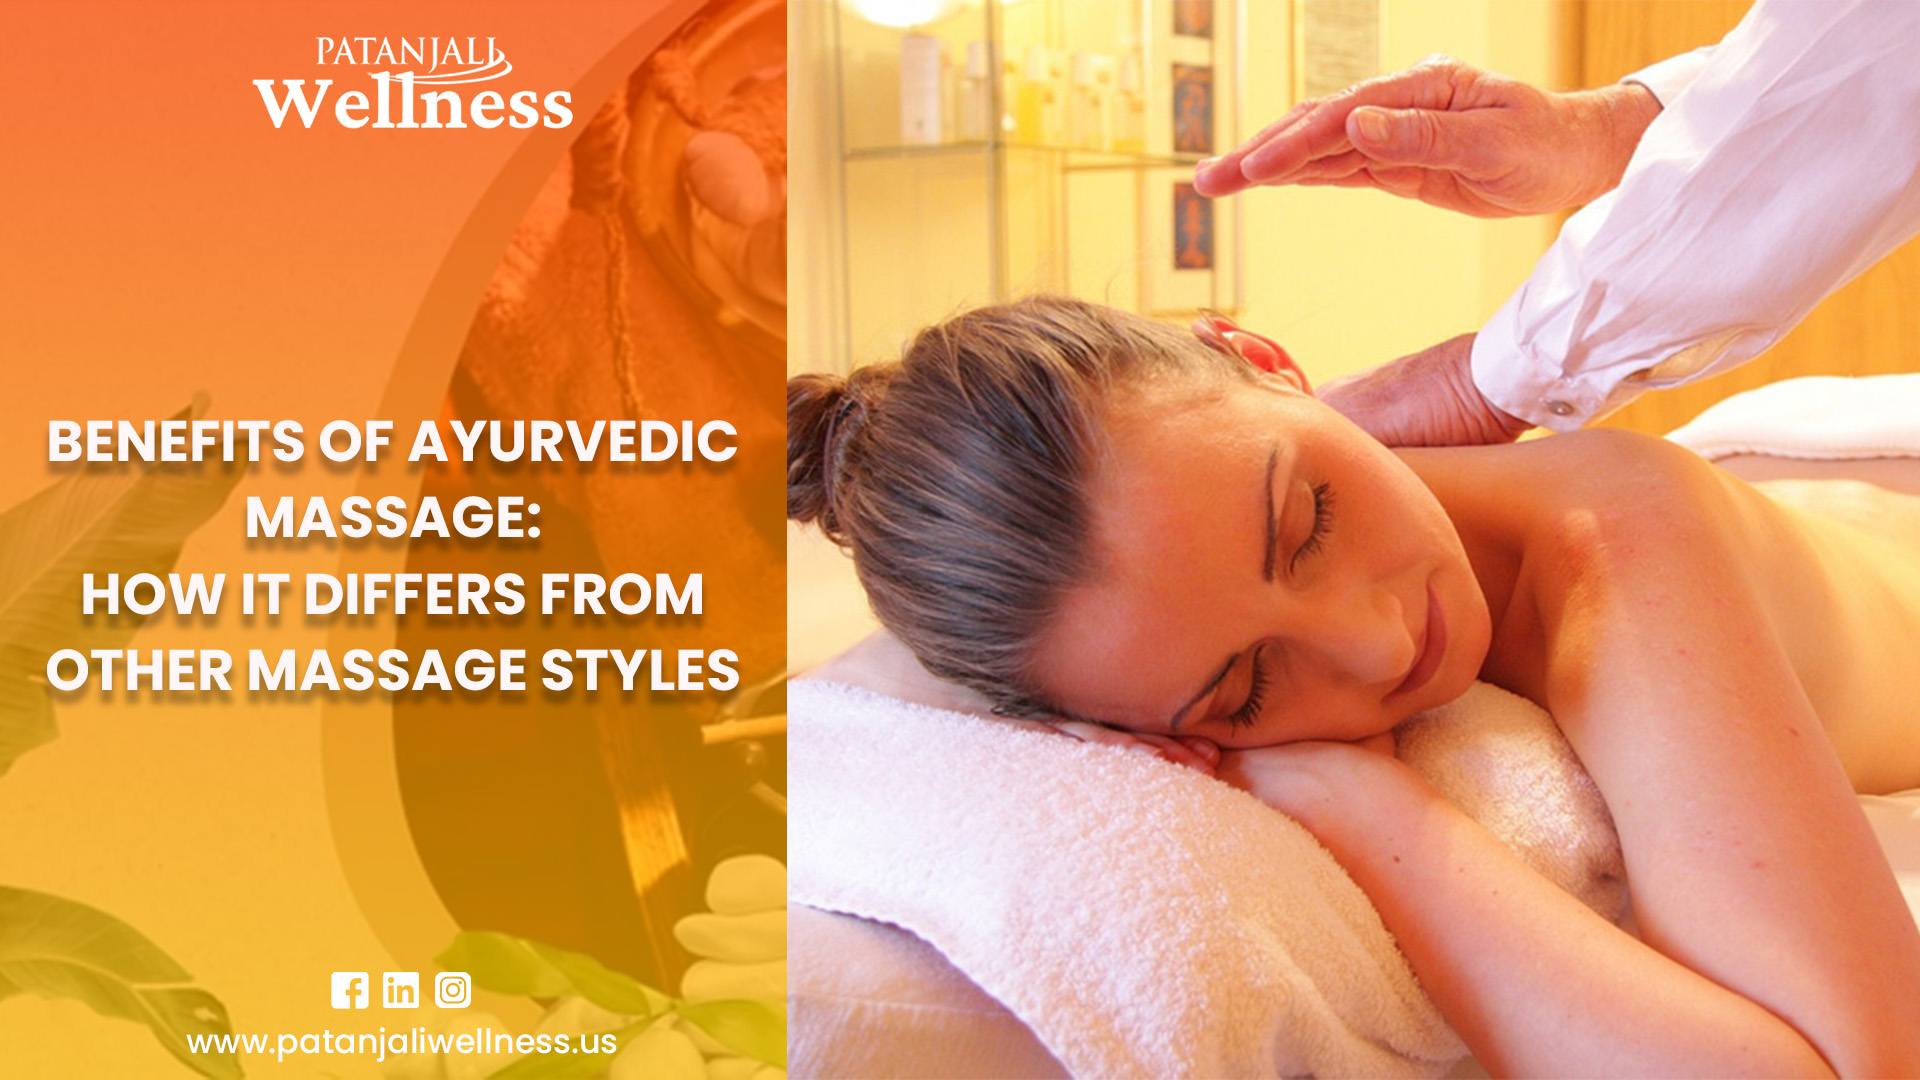 Benefits of Ayurvedic Massage How it Differs from Other Massage Styles